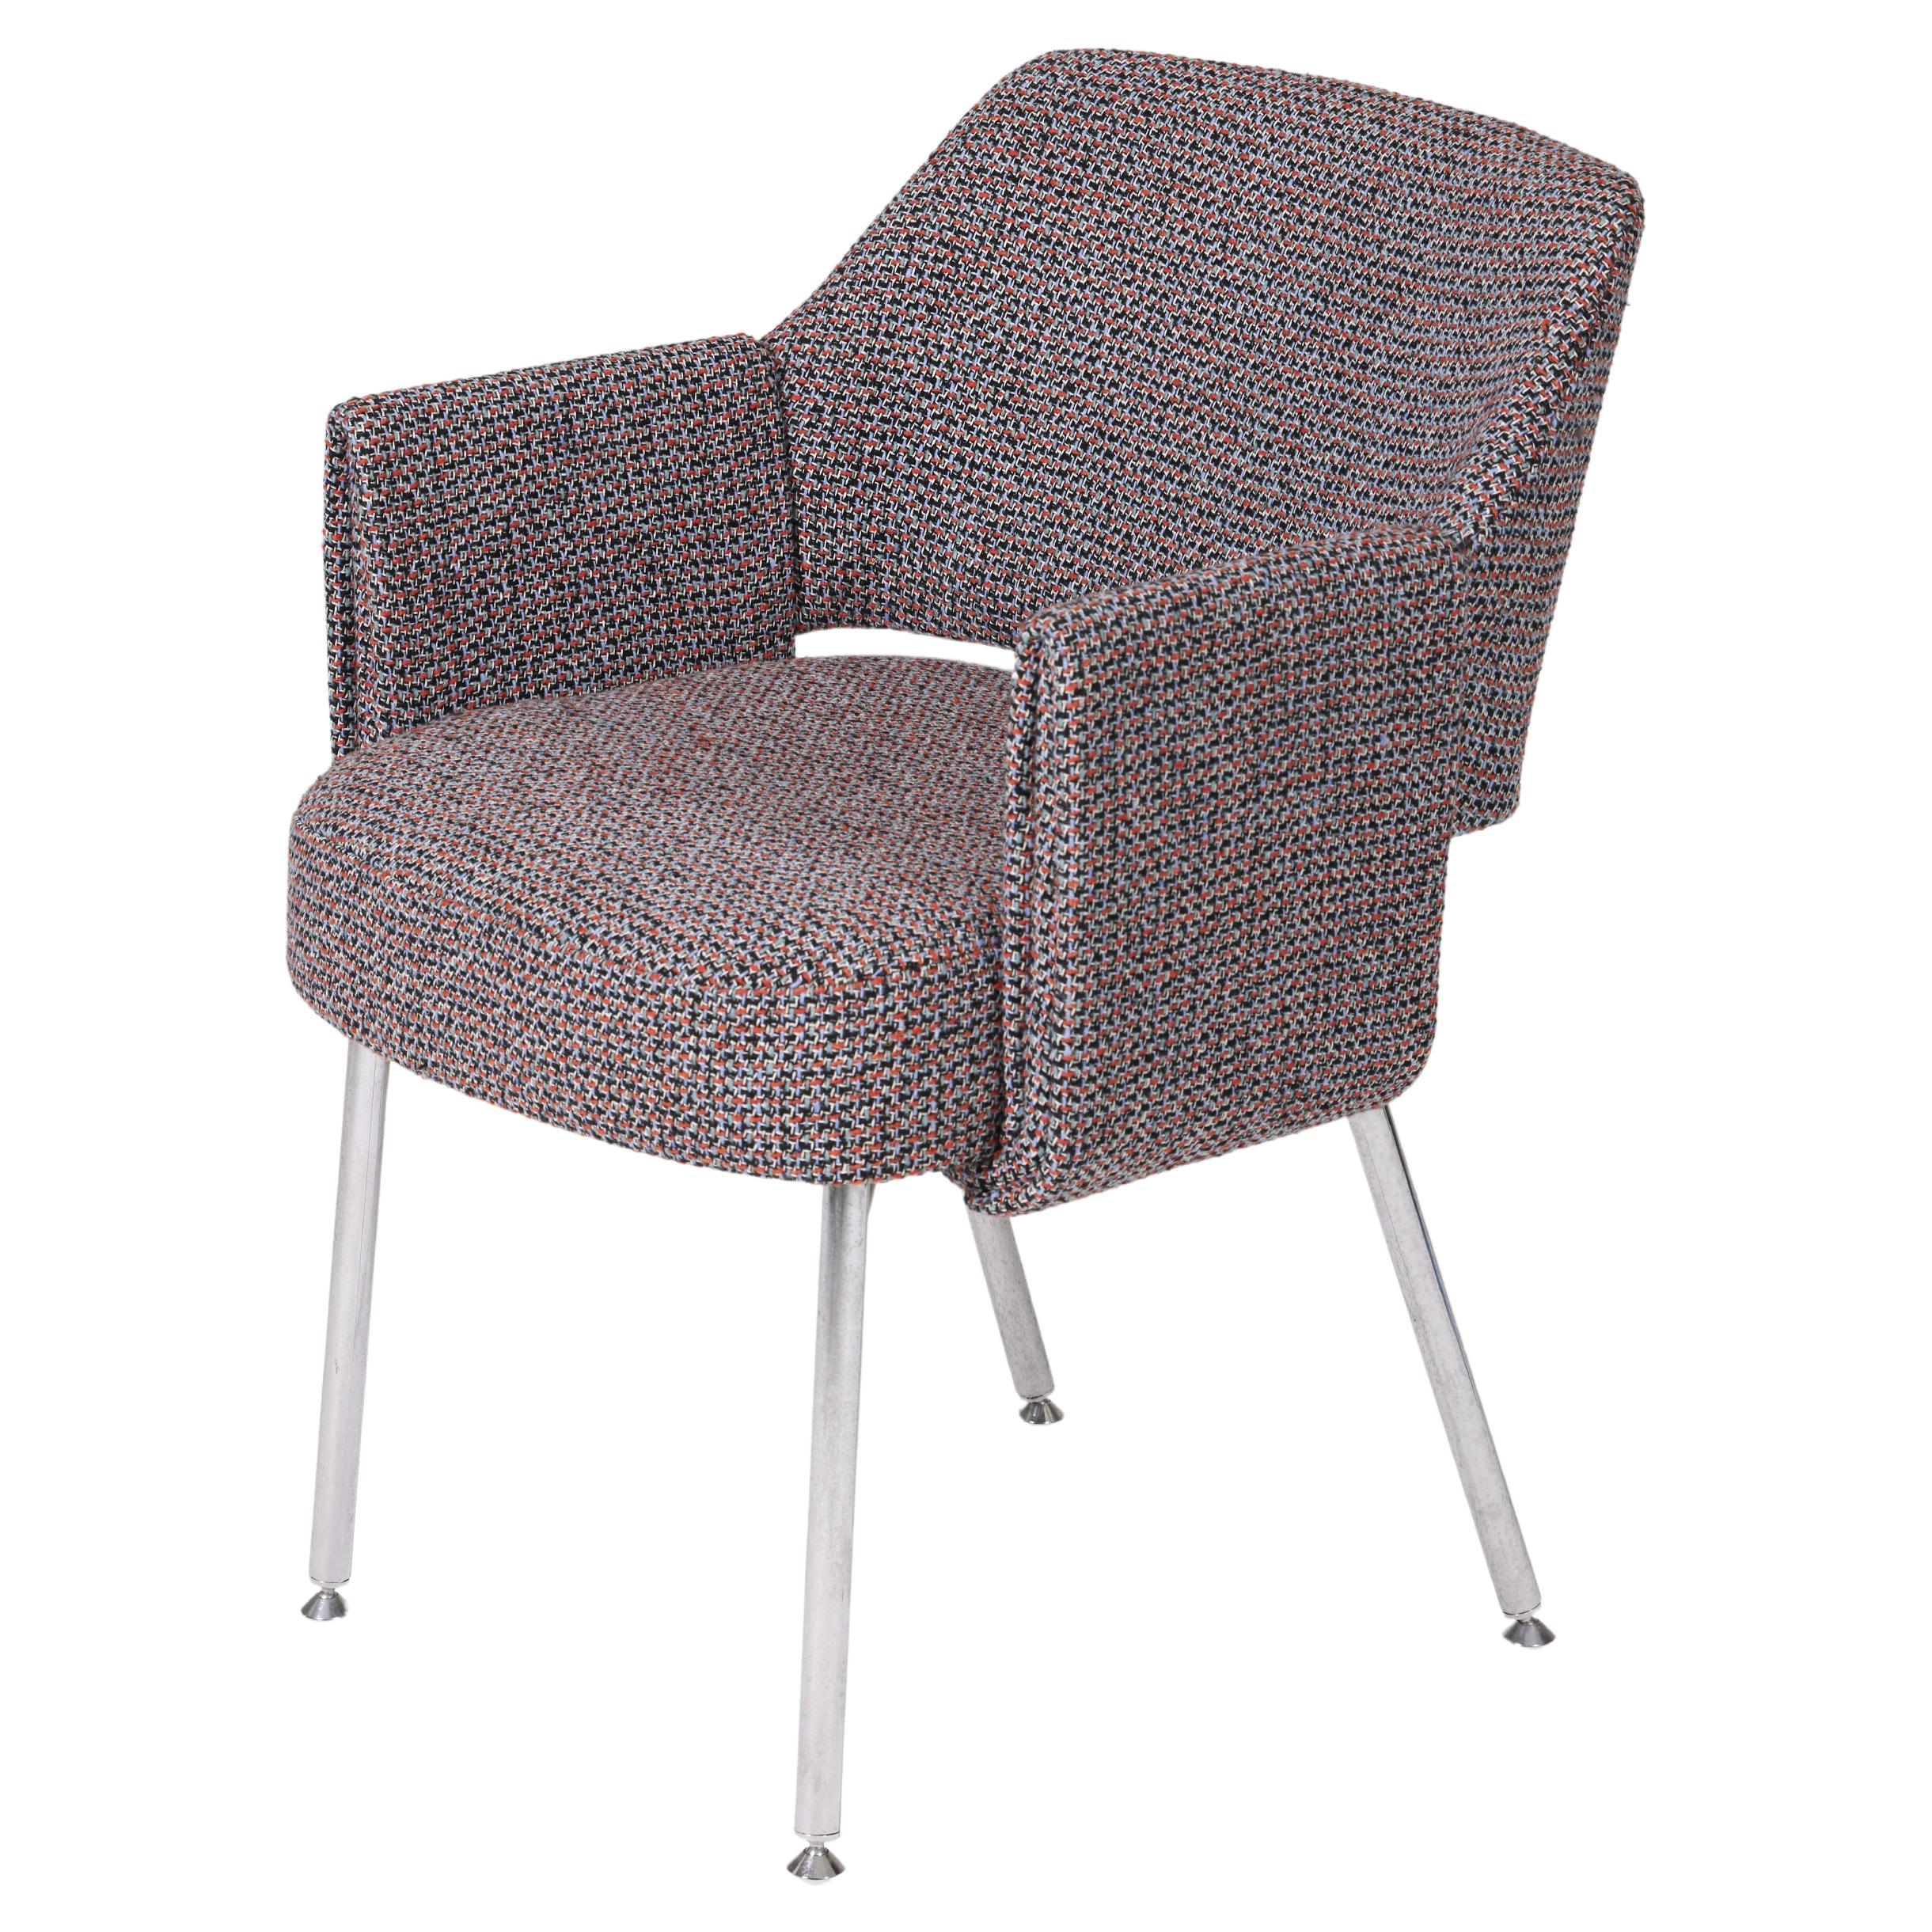 Deauville Airborne armchair in tweed For Sale